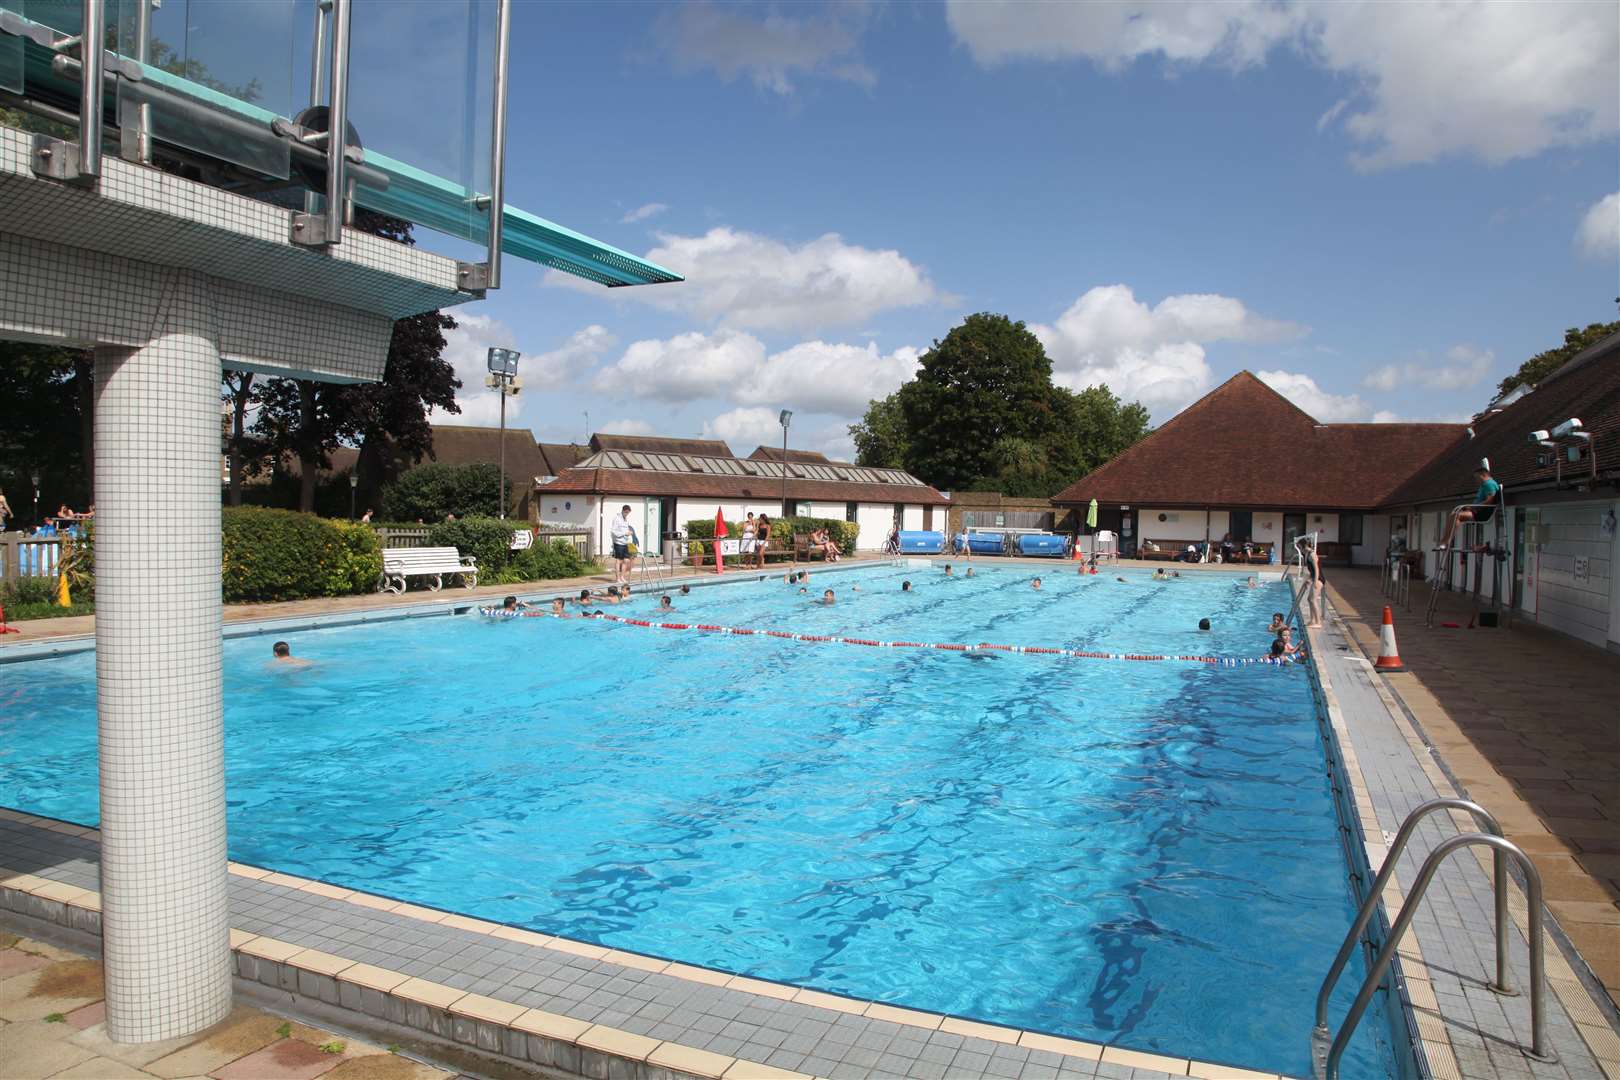 Faversham Pools has been rated as the second best outdoor swimming facility in the country by the Daily Mail (12634634)